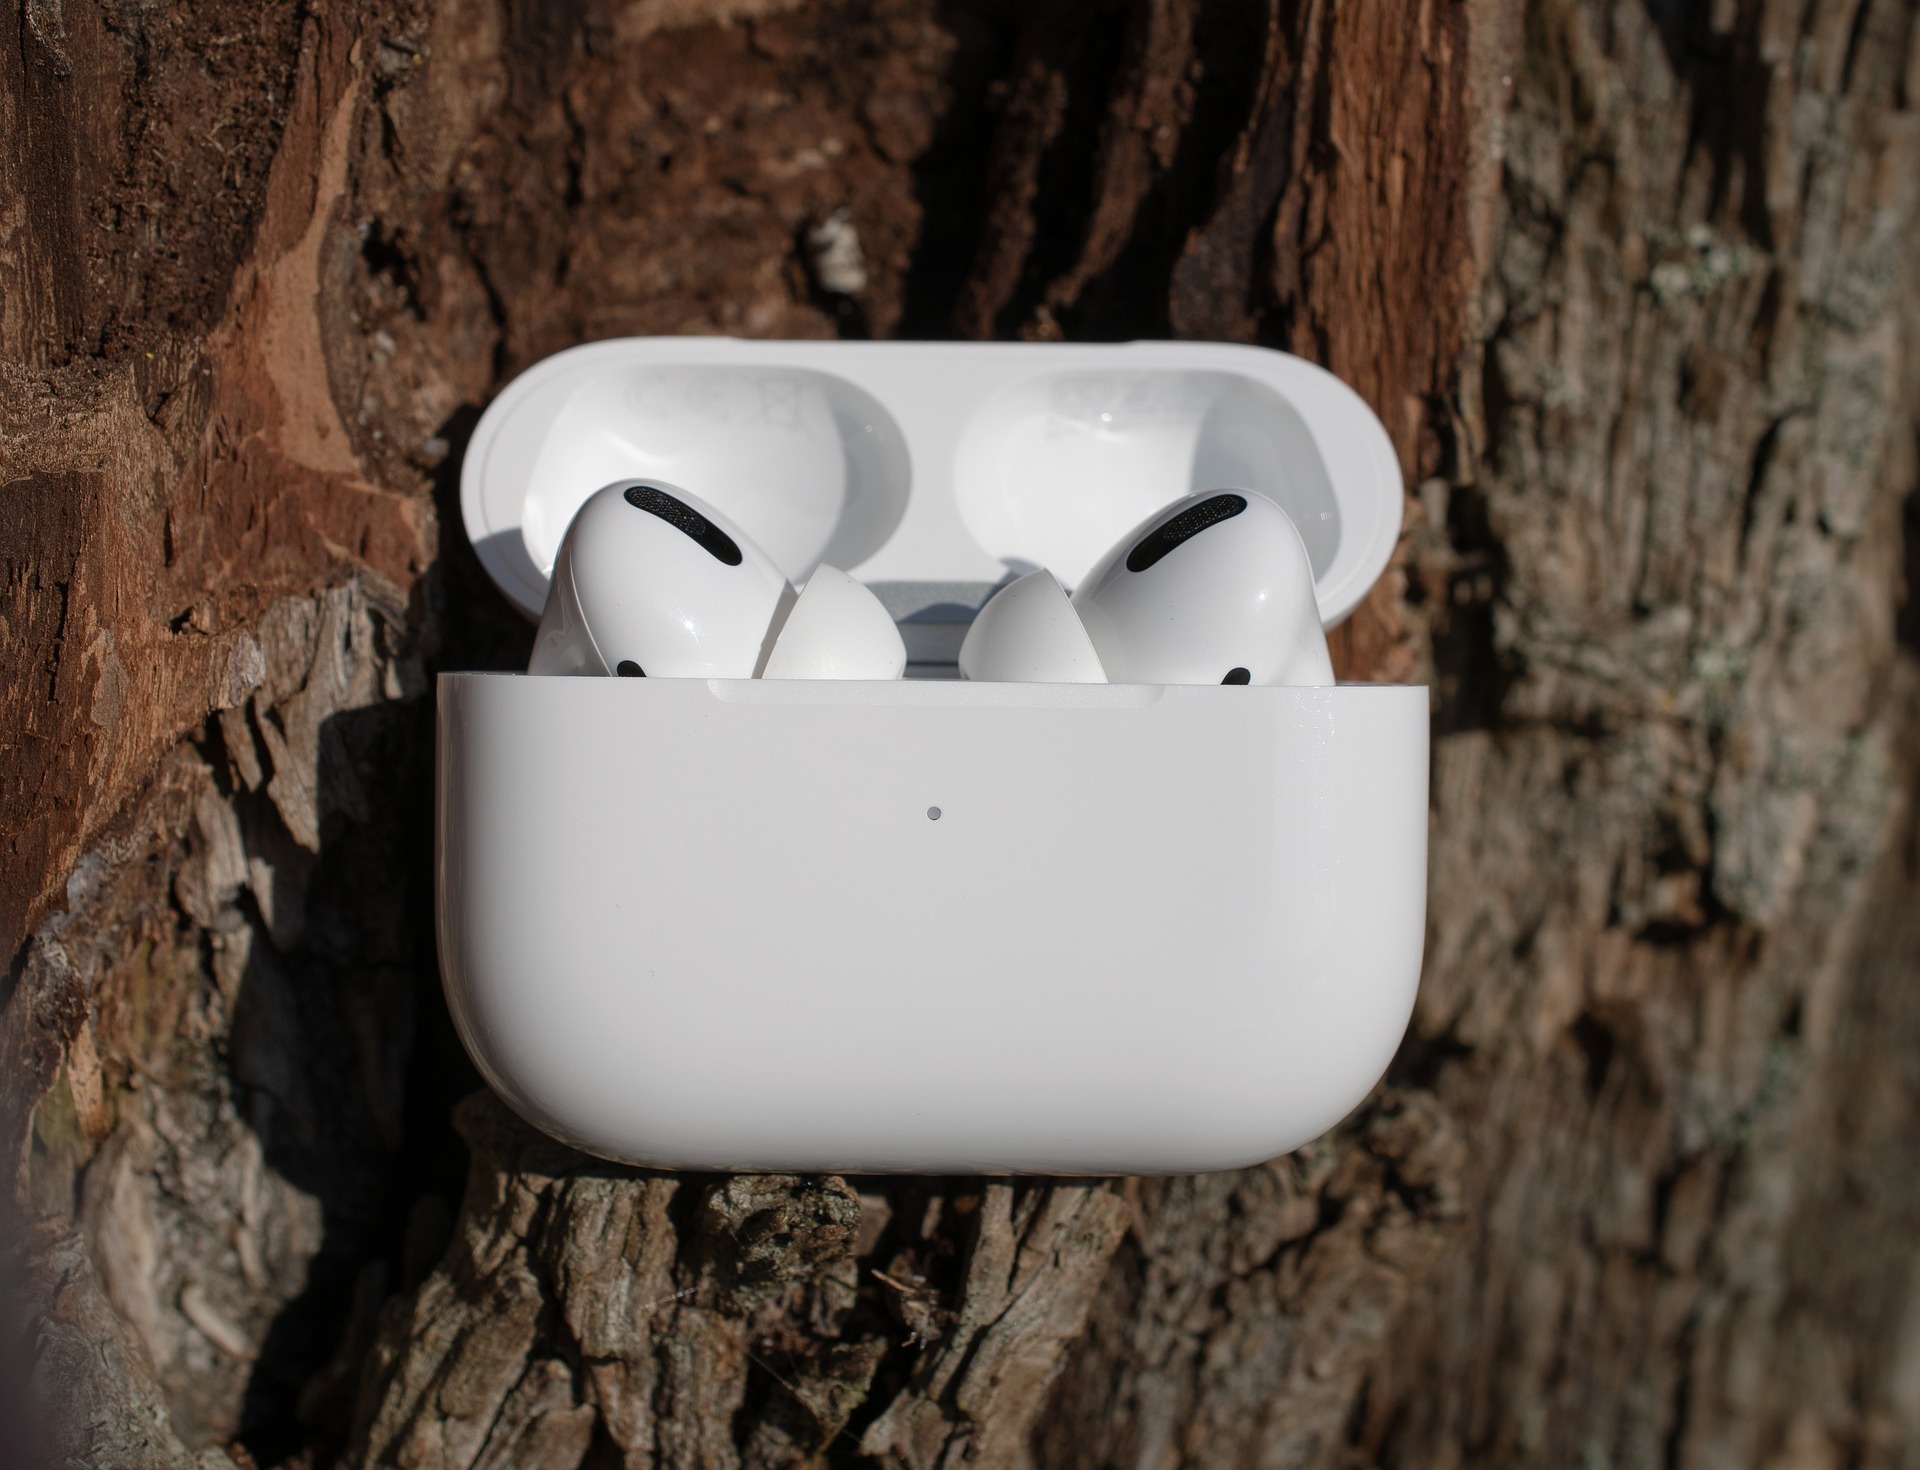  airpods   bluetooth  apple   